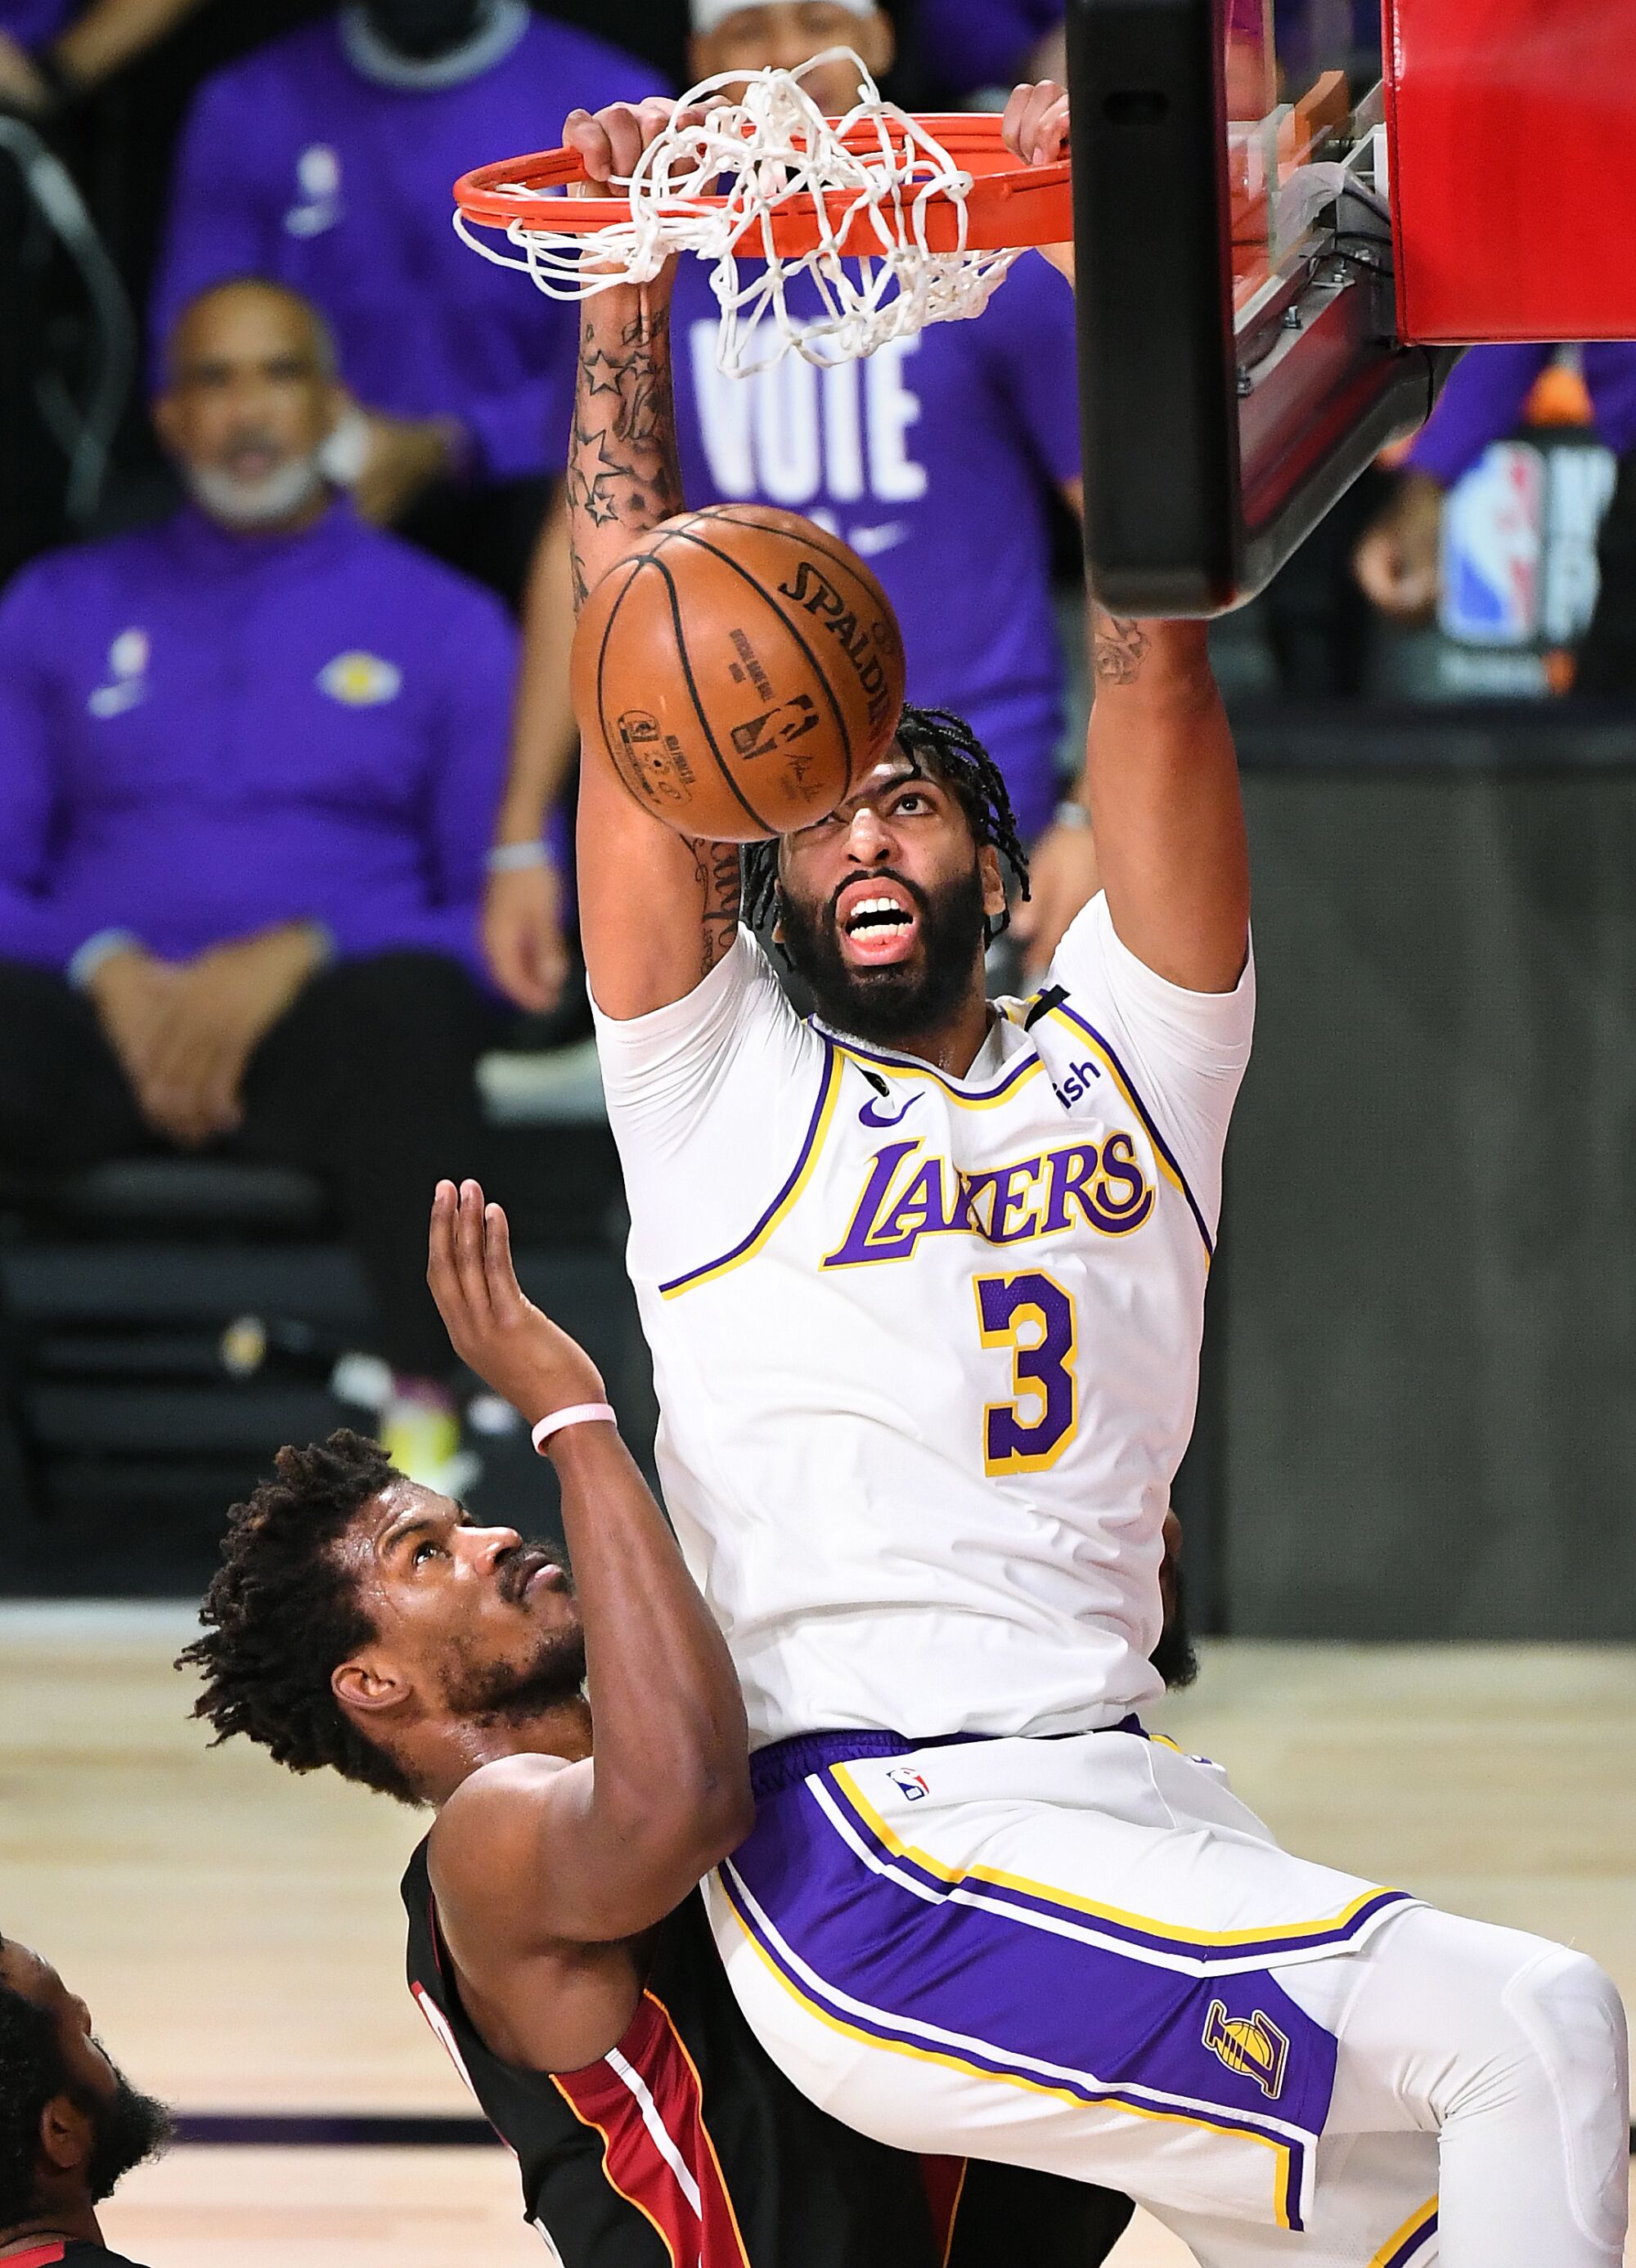 Lakers forward Anthony Davis dunks over Miami Heat forward Jimmy Butler in the first quarter of Game 6 of the NBA Finals.